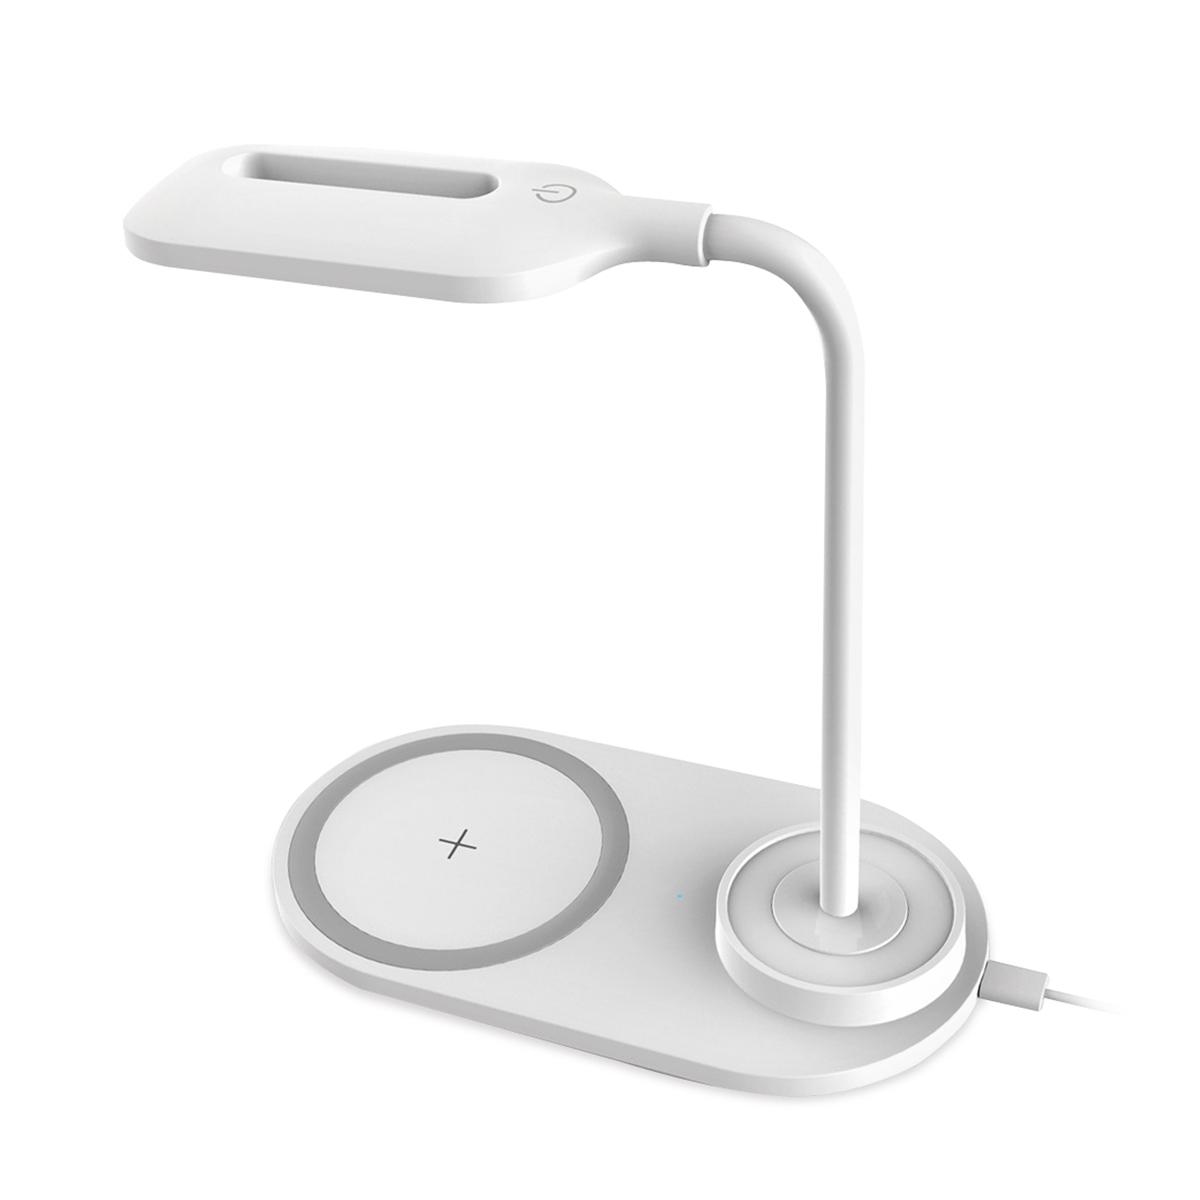 Platinet desk lamp wireless charger 5w white